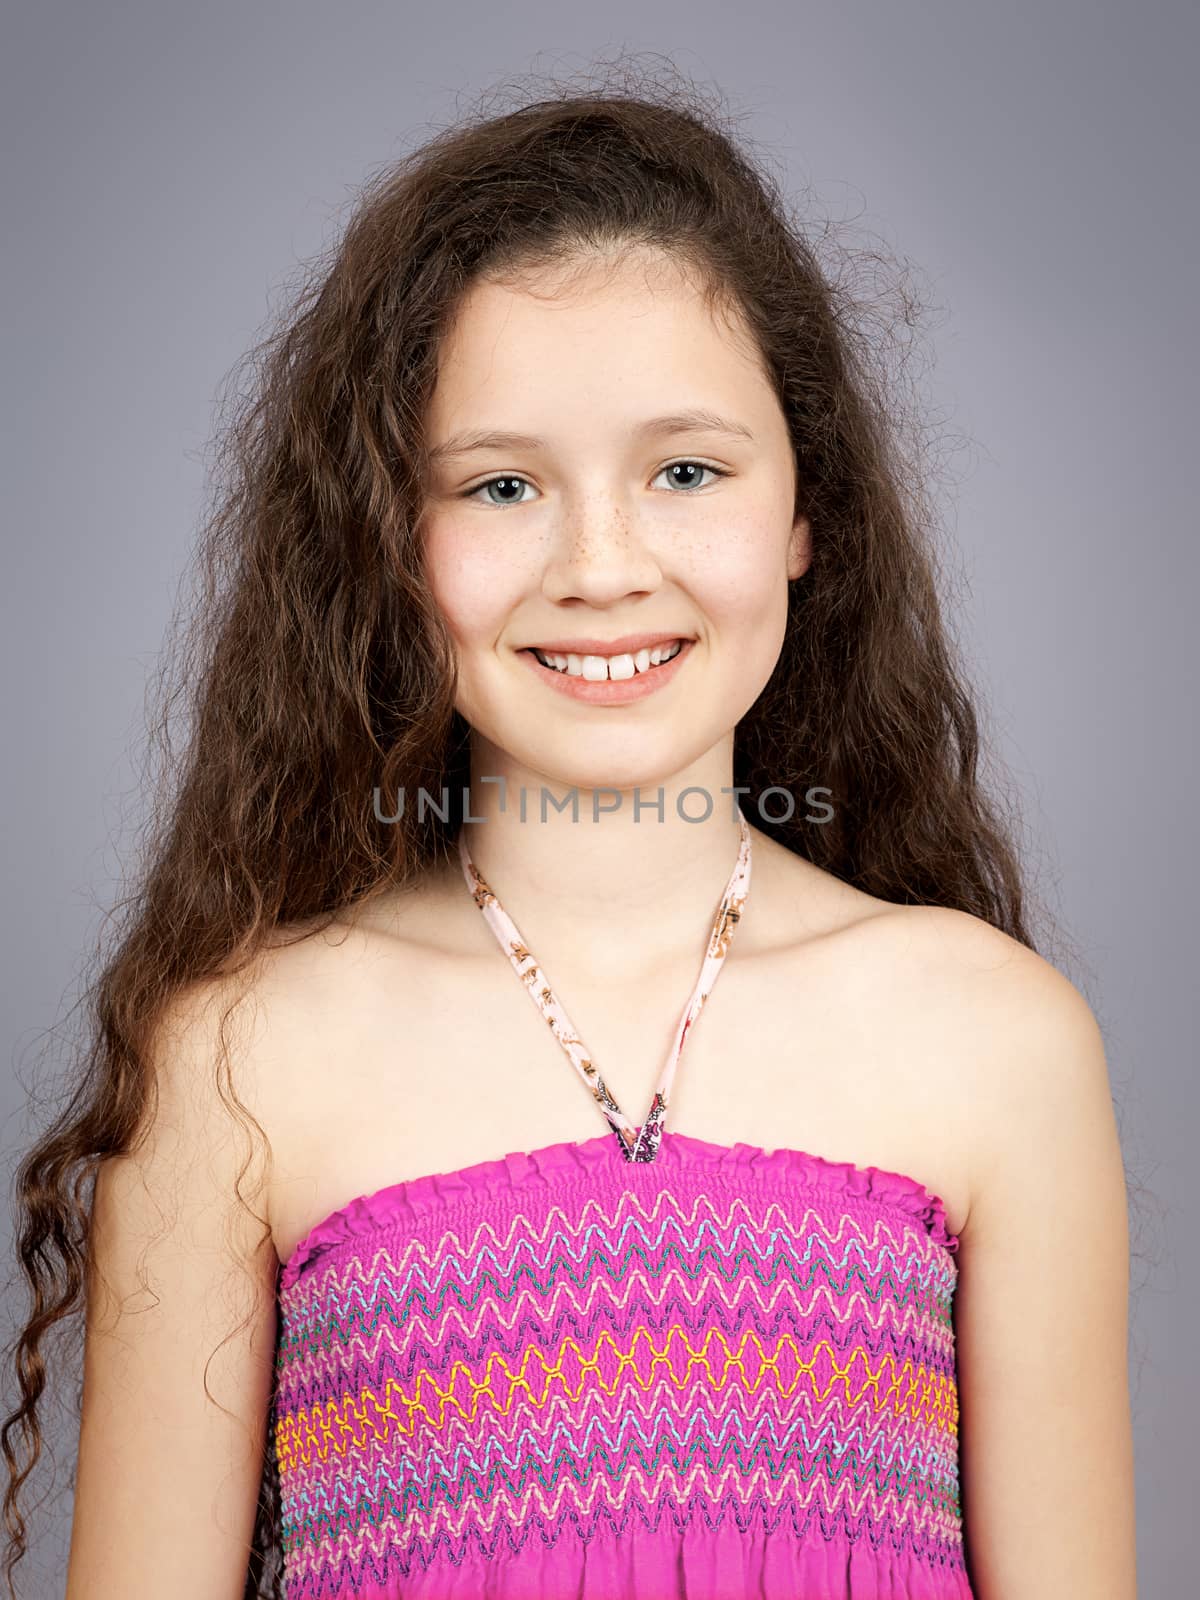 An image of a young girl portrait